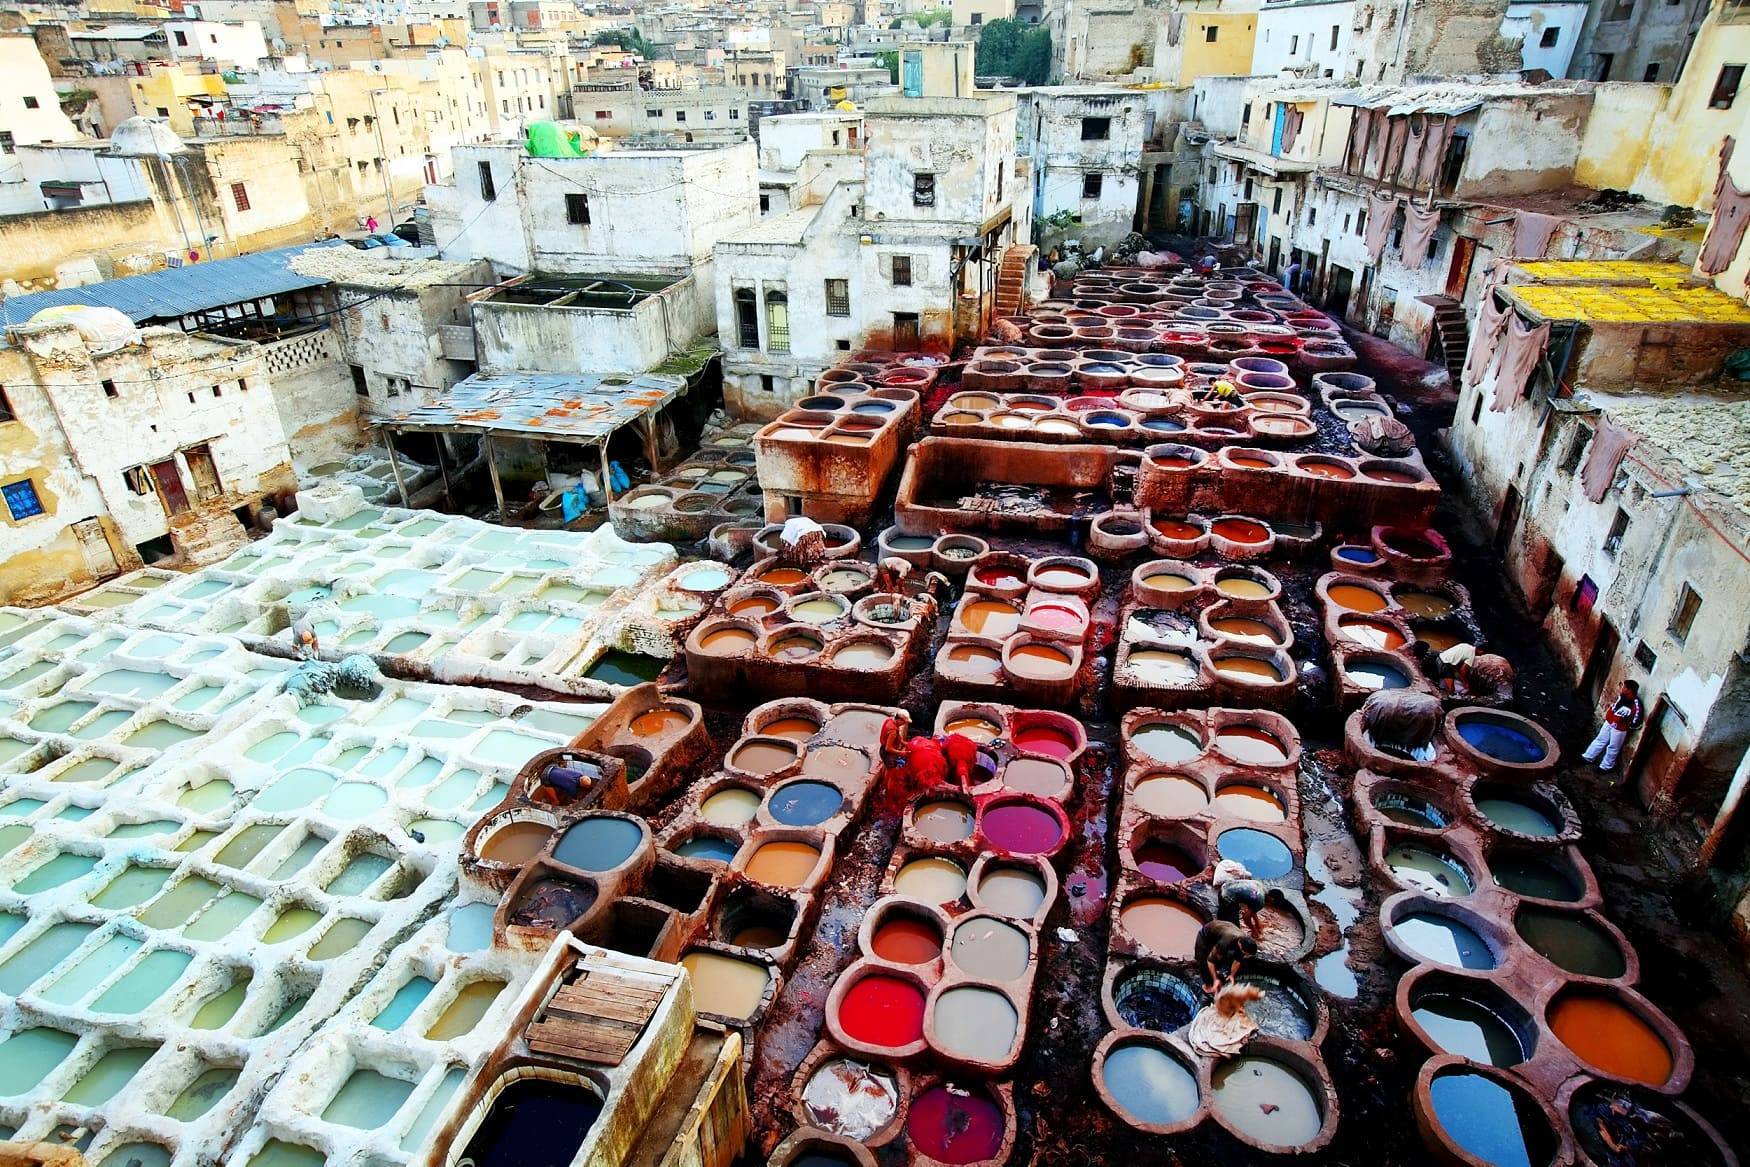 Chaouarra Tannery in Fes